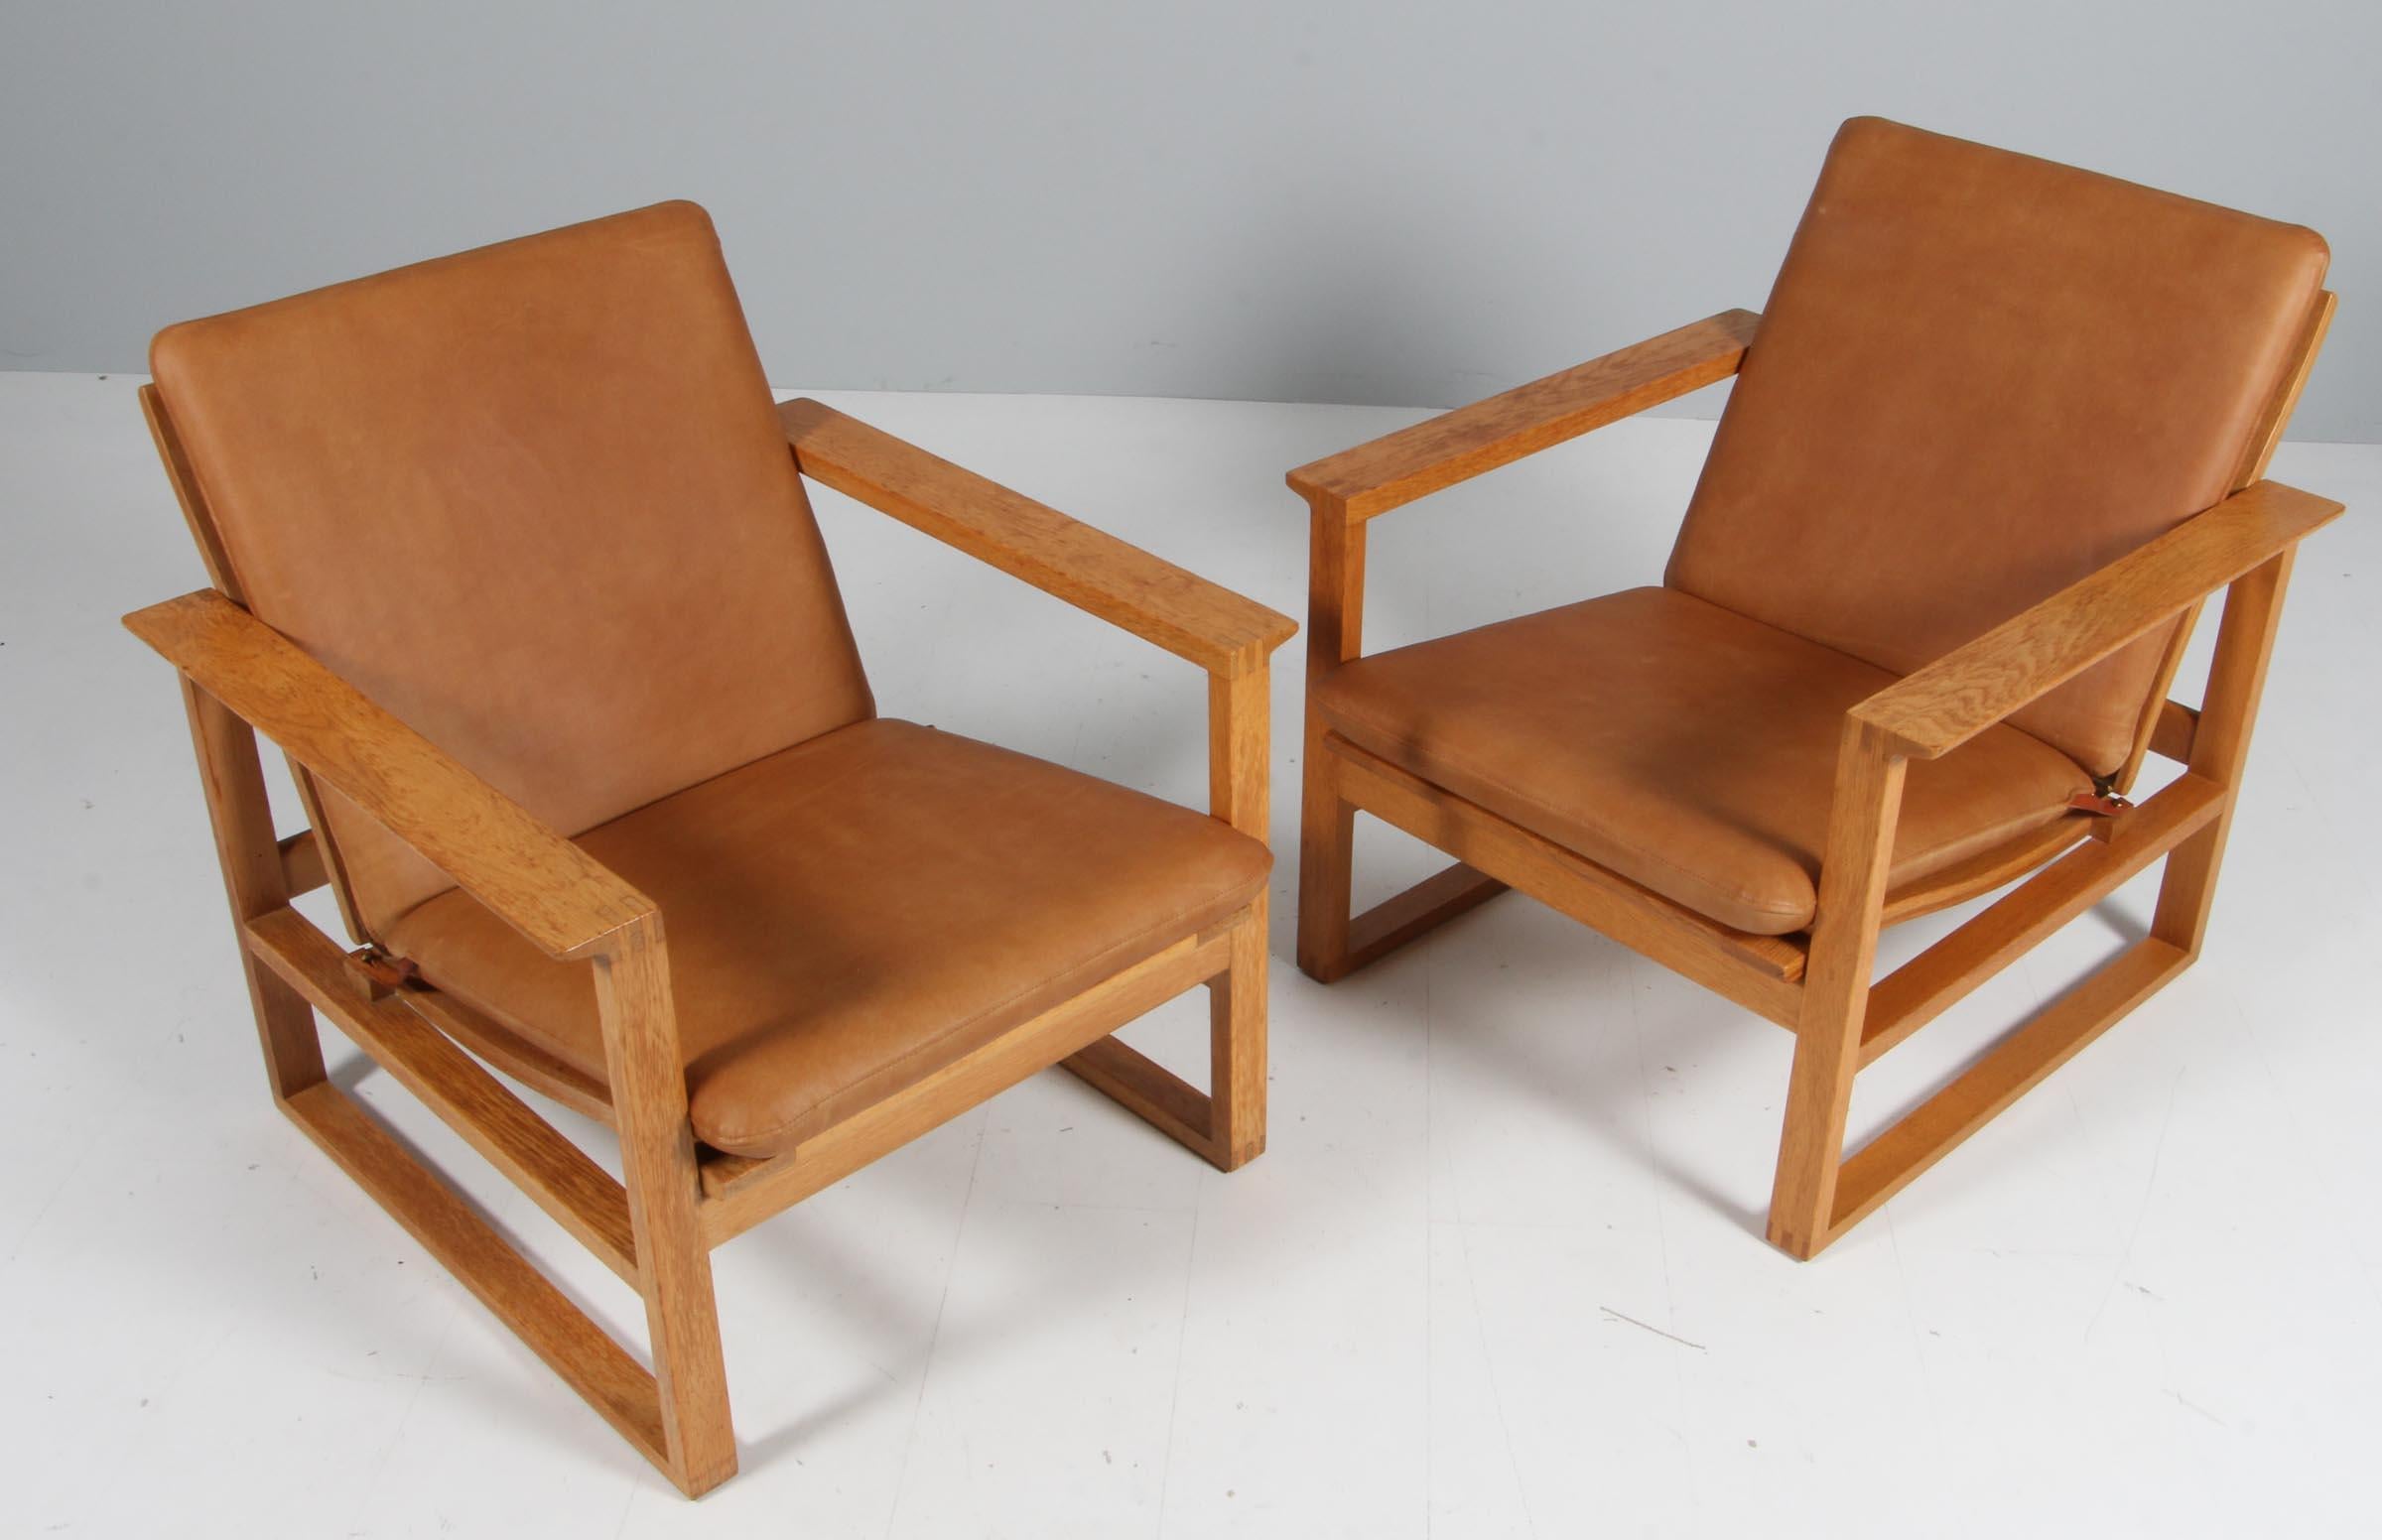 Børge Mogensen lounge chairs new upholstered with vintage aniline leather.

Frame of oak.

Model 2256, made by Fredericia furniture.